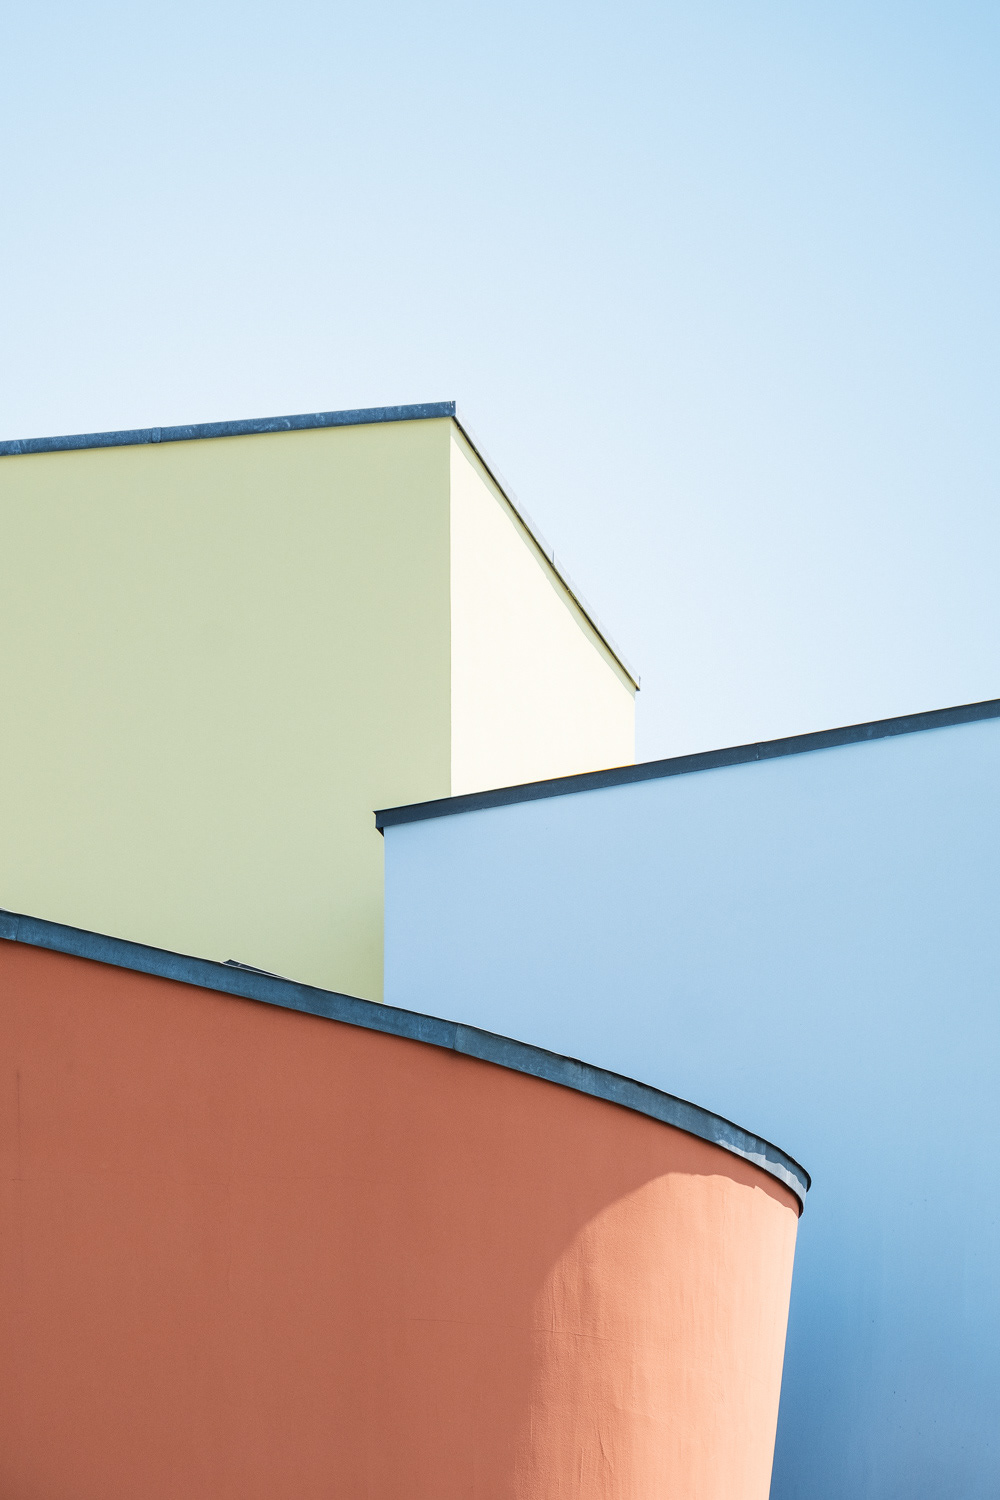 architecture Photography  abstract Frank Gehry Switzerland modern minimal